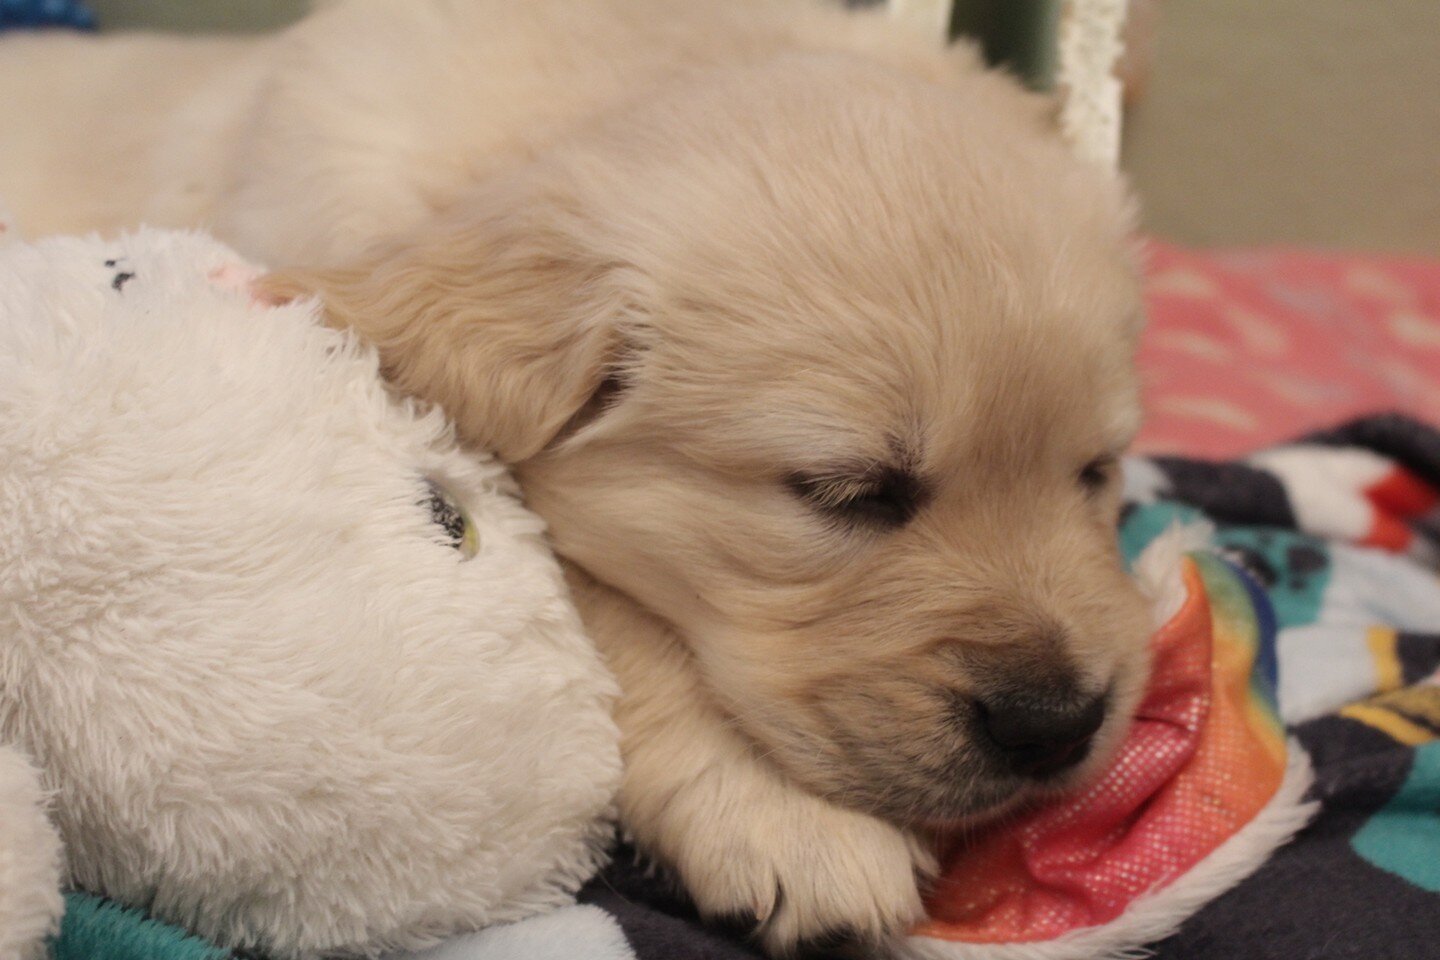 Sleeping like a baby 

Puppies available for new homes in June.

www.golden-mags.squarespace.com 

#goldenmags #goldenmagsfamily #goldenretreiver #goldenpuppies #goldenretrieverlife #itsapupslife#grpup #puppylove #puppypic #cutedog #adorablepuppy #re